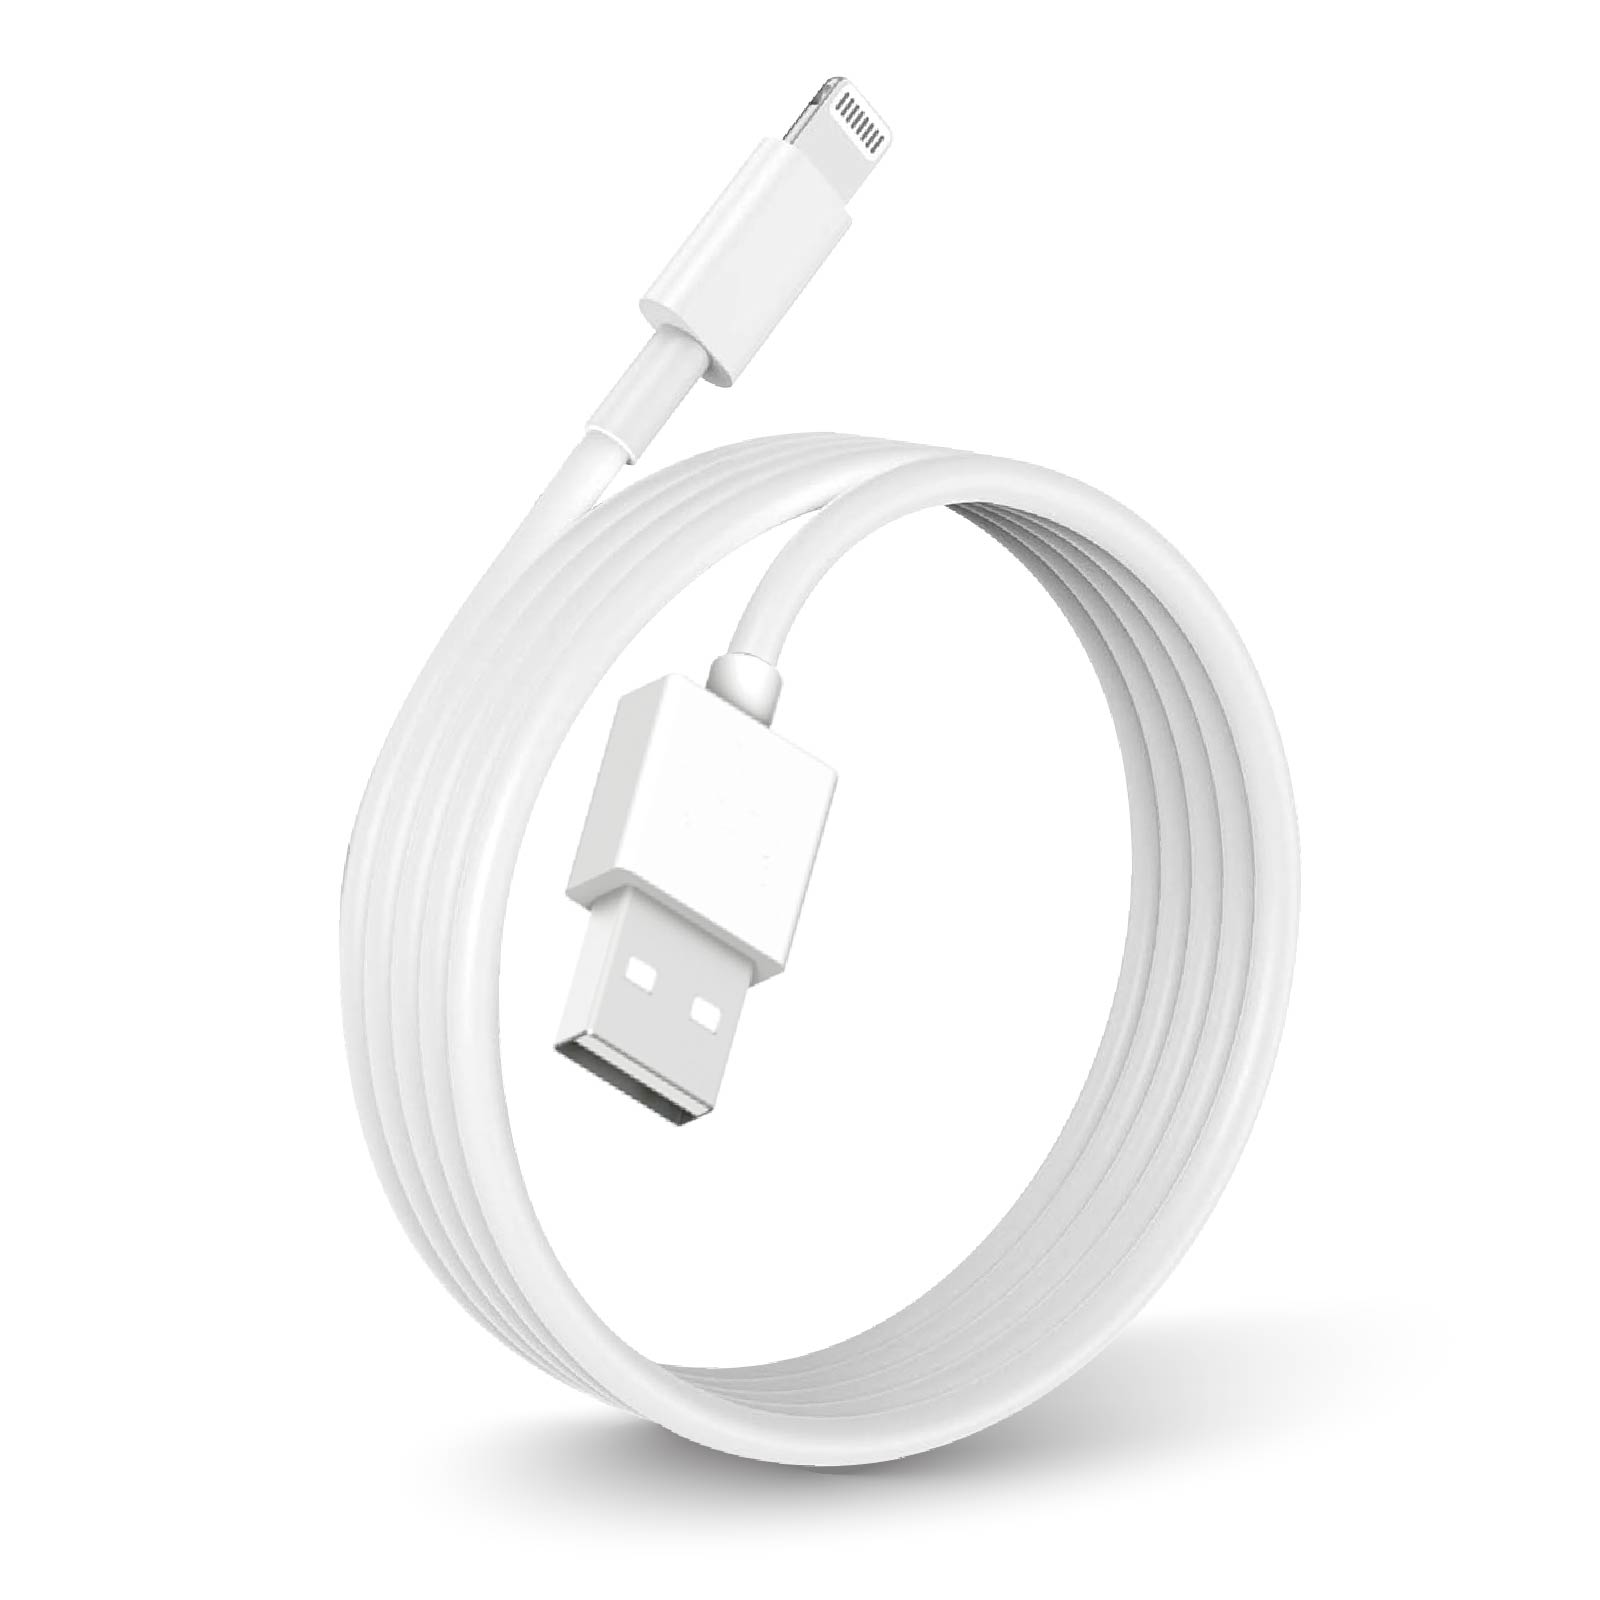 USB 2.0 to Lightning Charging cable